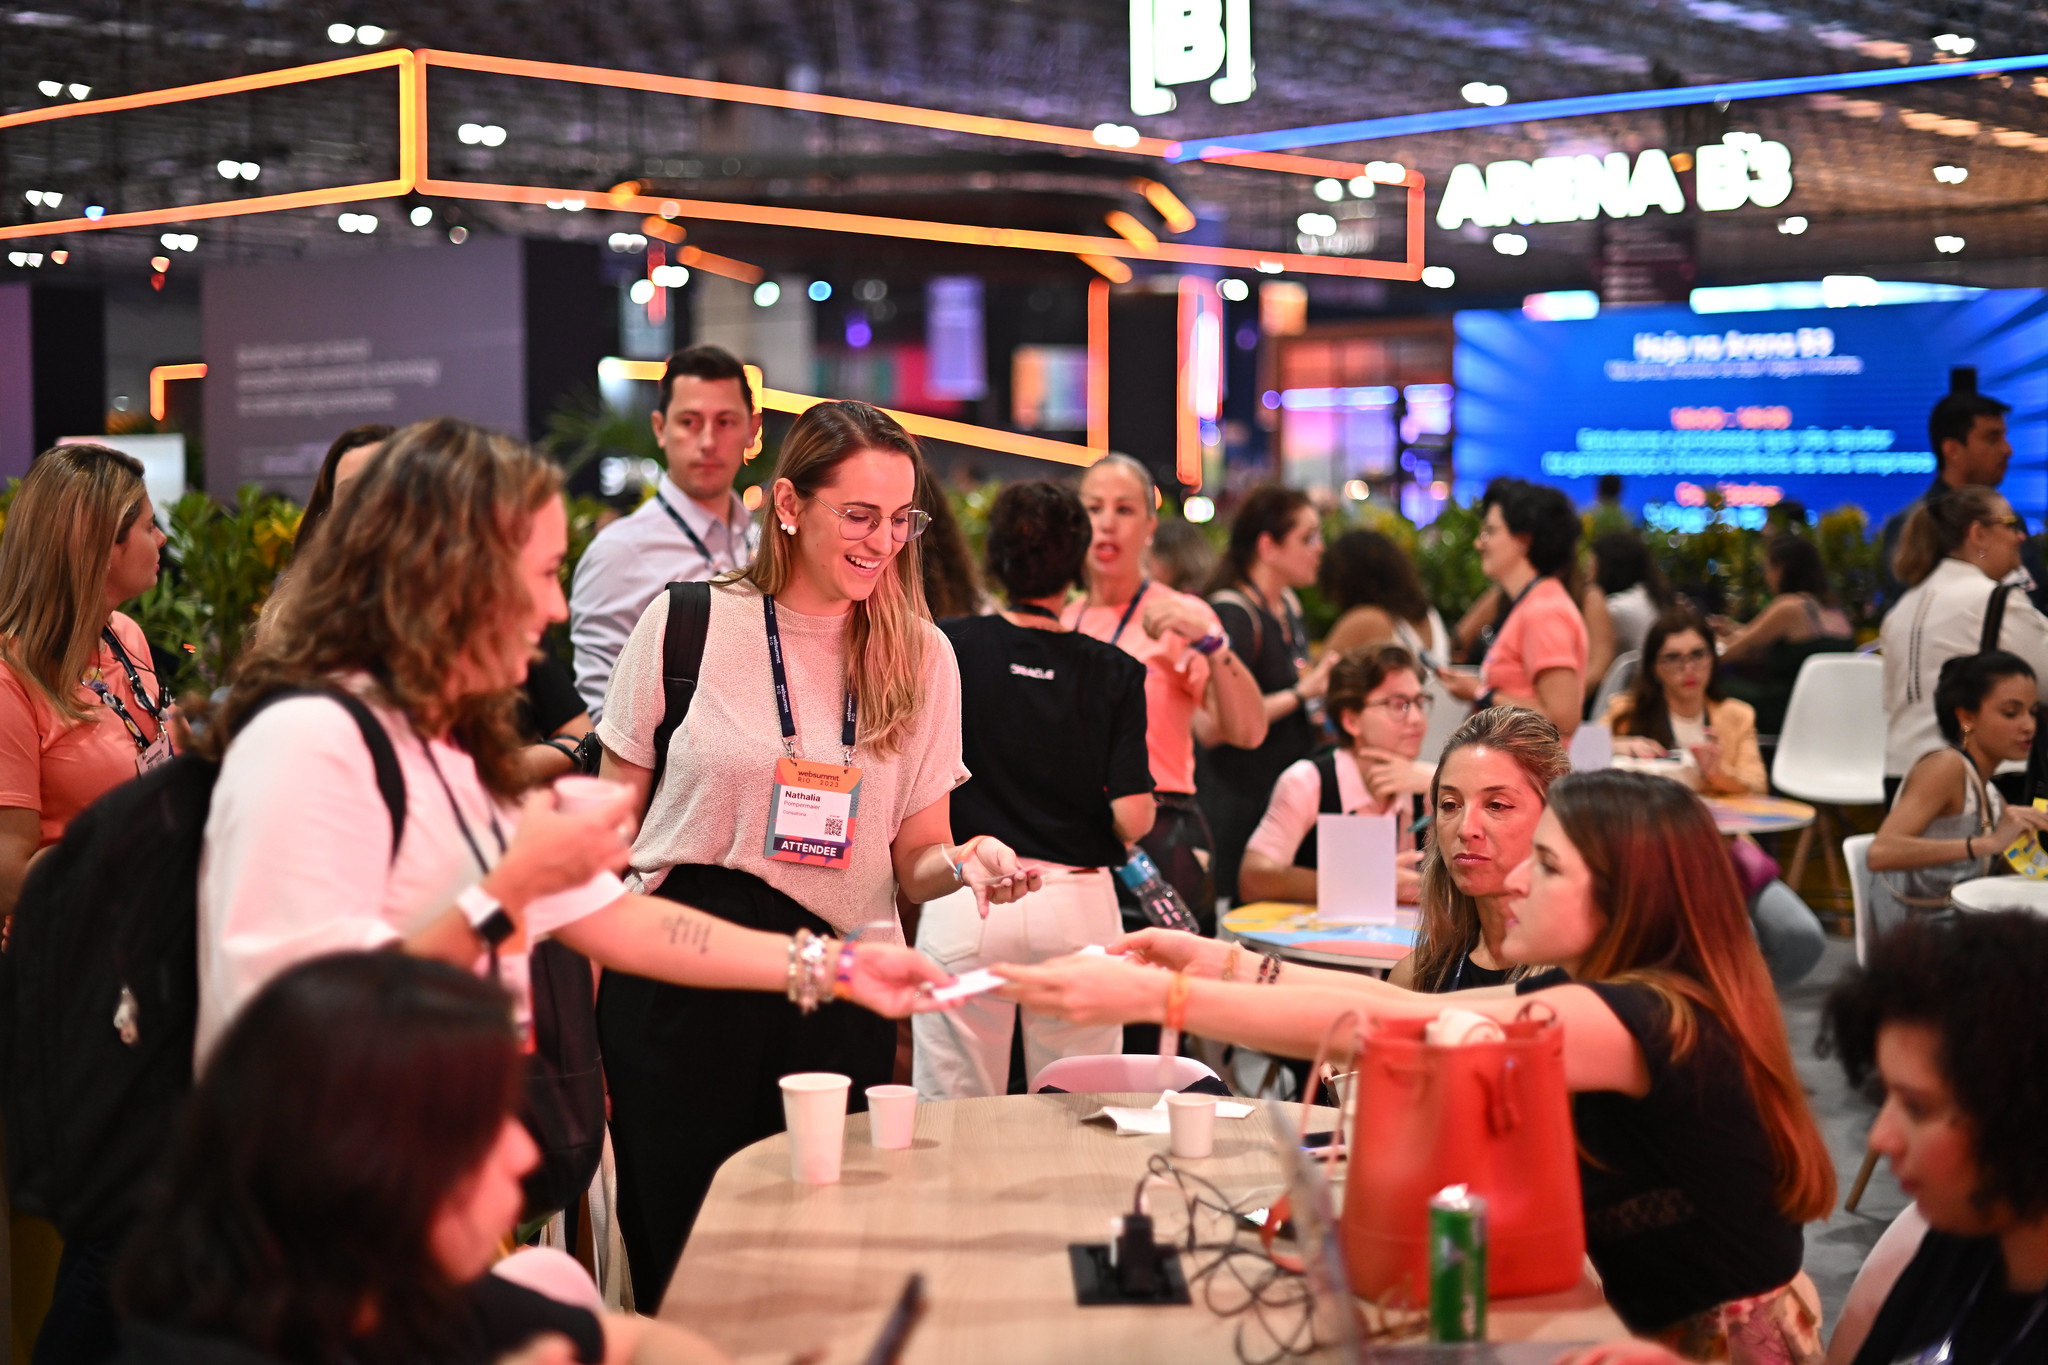 A busy lounge area. People are seated at round wooden tables, and standing in groups. People are smiling and chatting. Visible in the background, behind a leafy hedge, are large stands on an exhibition floor. This is the Women in Tech Lounge at Web Summit Rio.